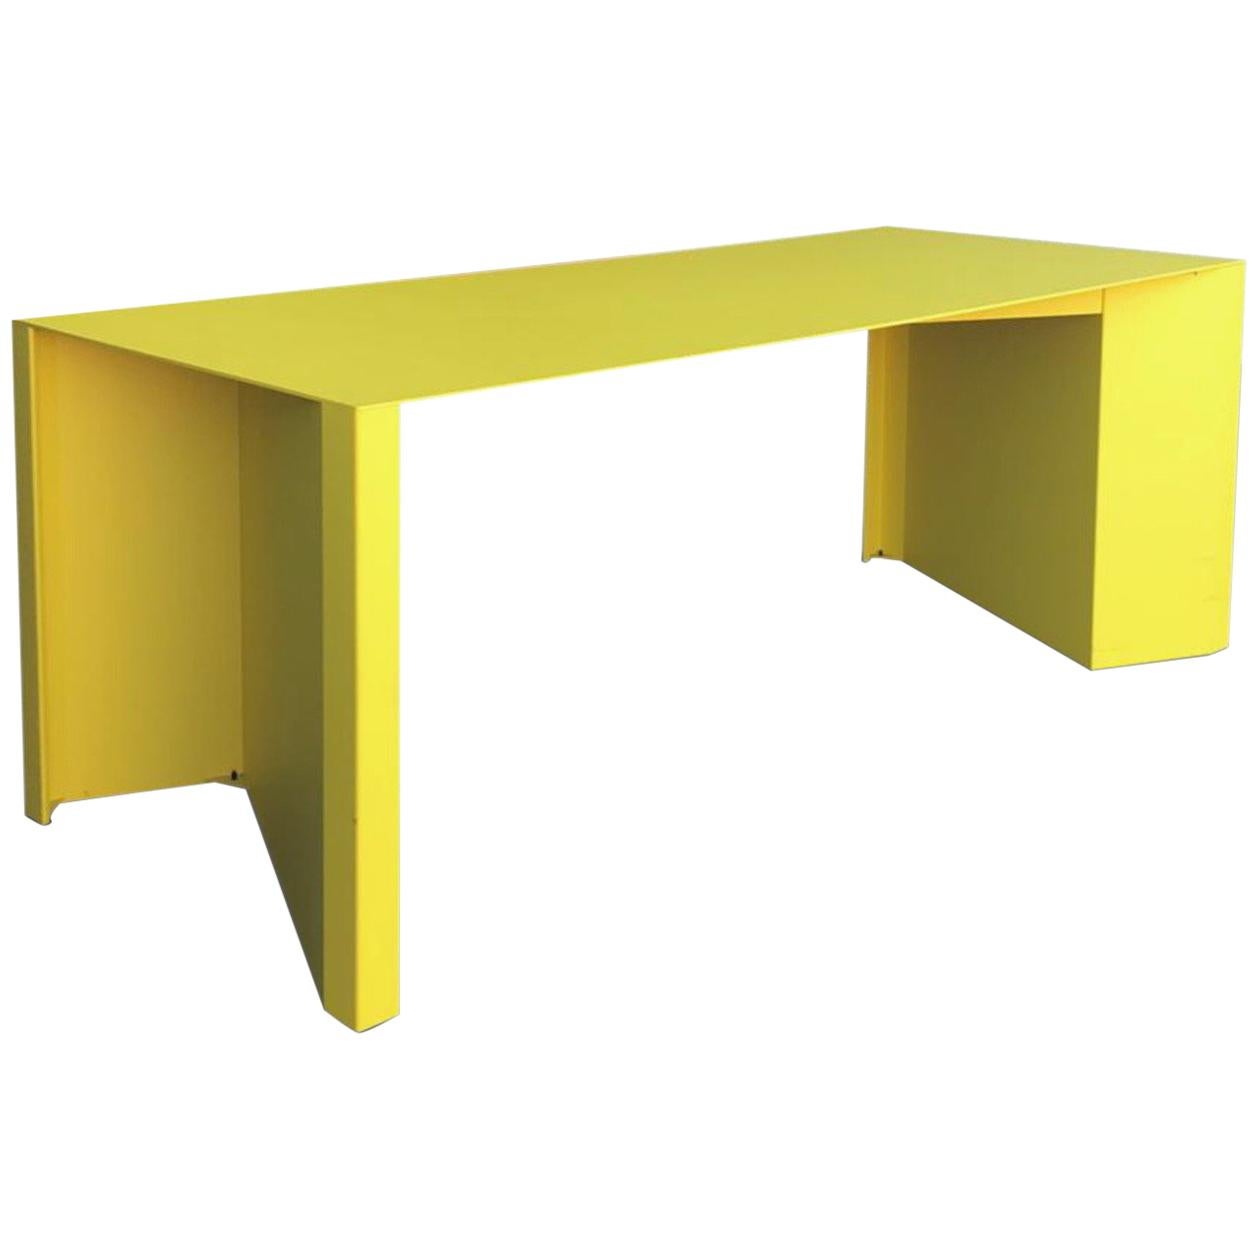 Eccentric Metal Yellow Z-Table by Claire Bataille and Paul Ibens for Bulo